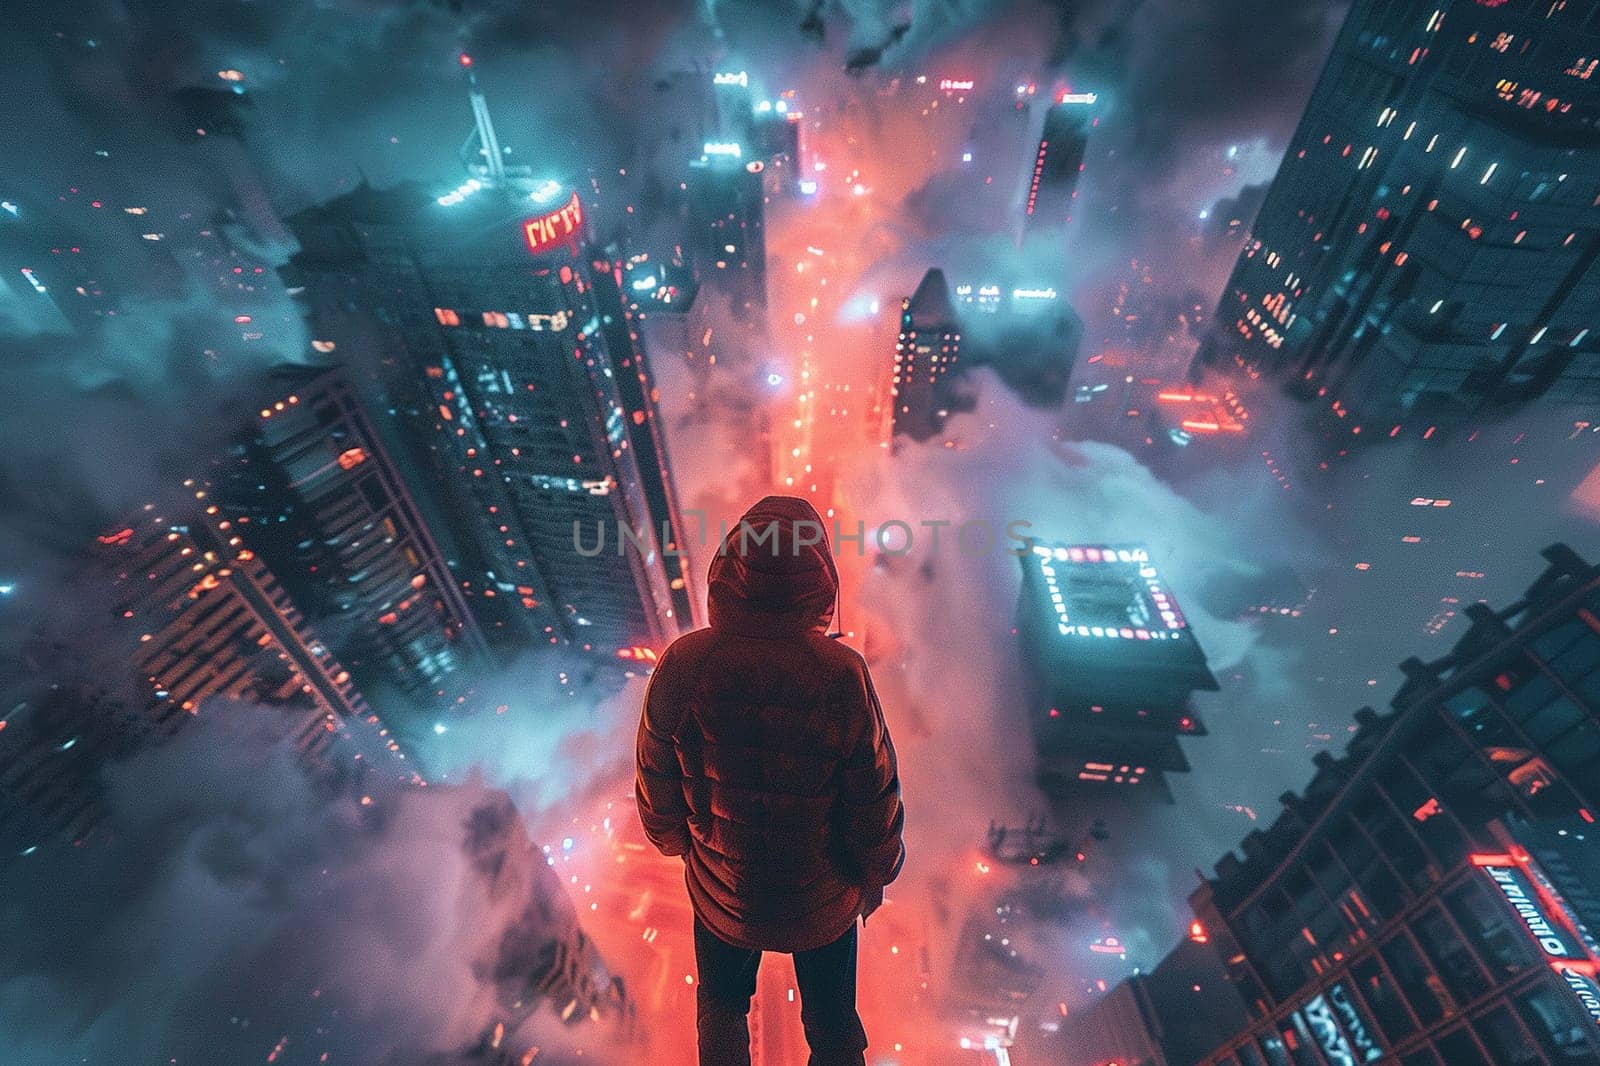 Top view of a man standing with his back on a skyscraper at night. Blur, neon, clouds.